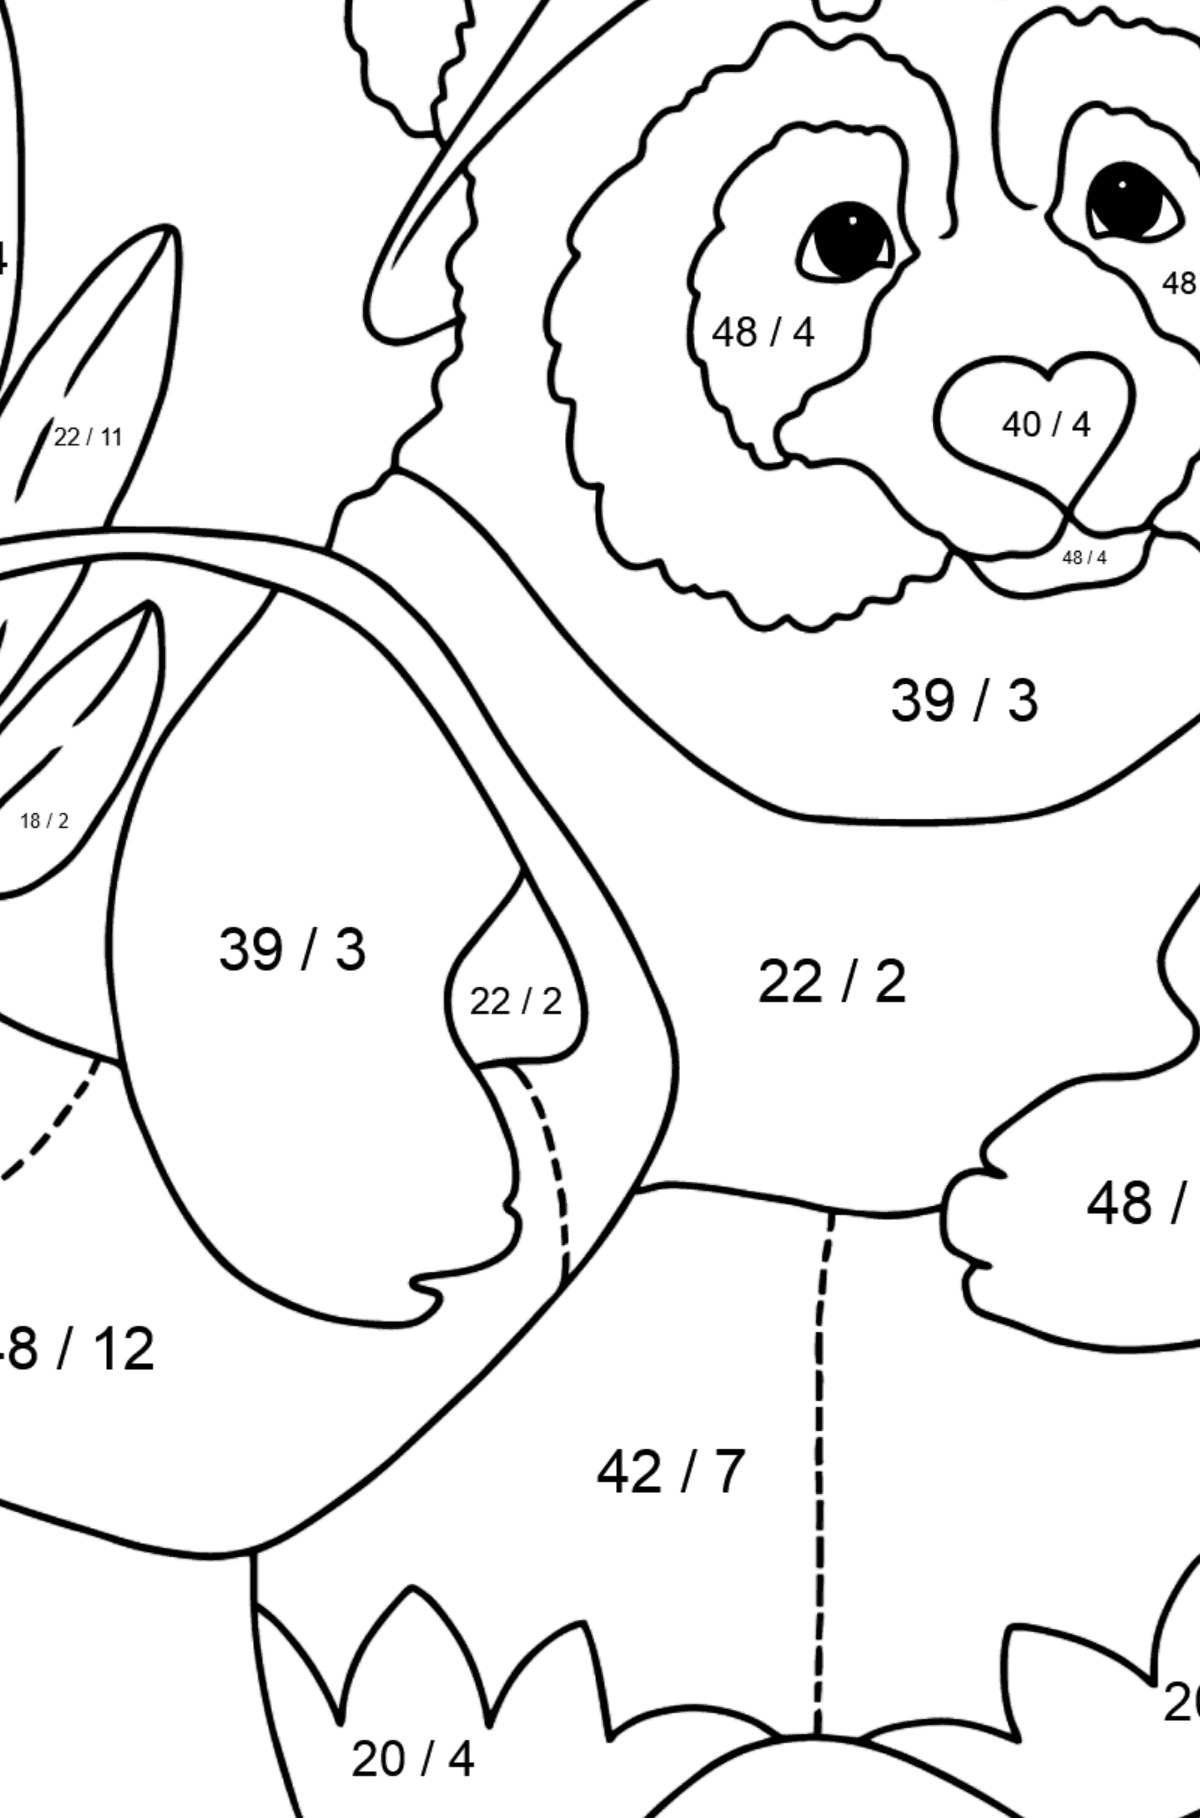 Kind Panda coloring page - Math Coloring - Division for Kids